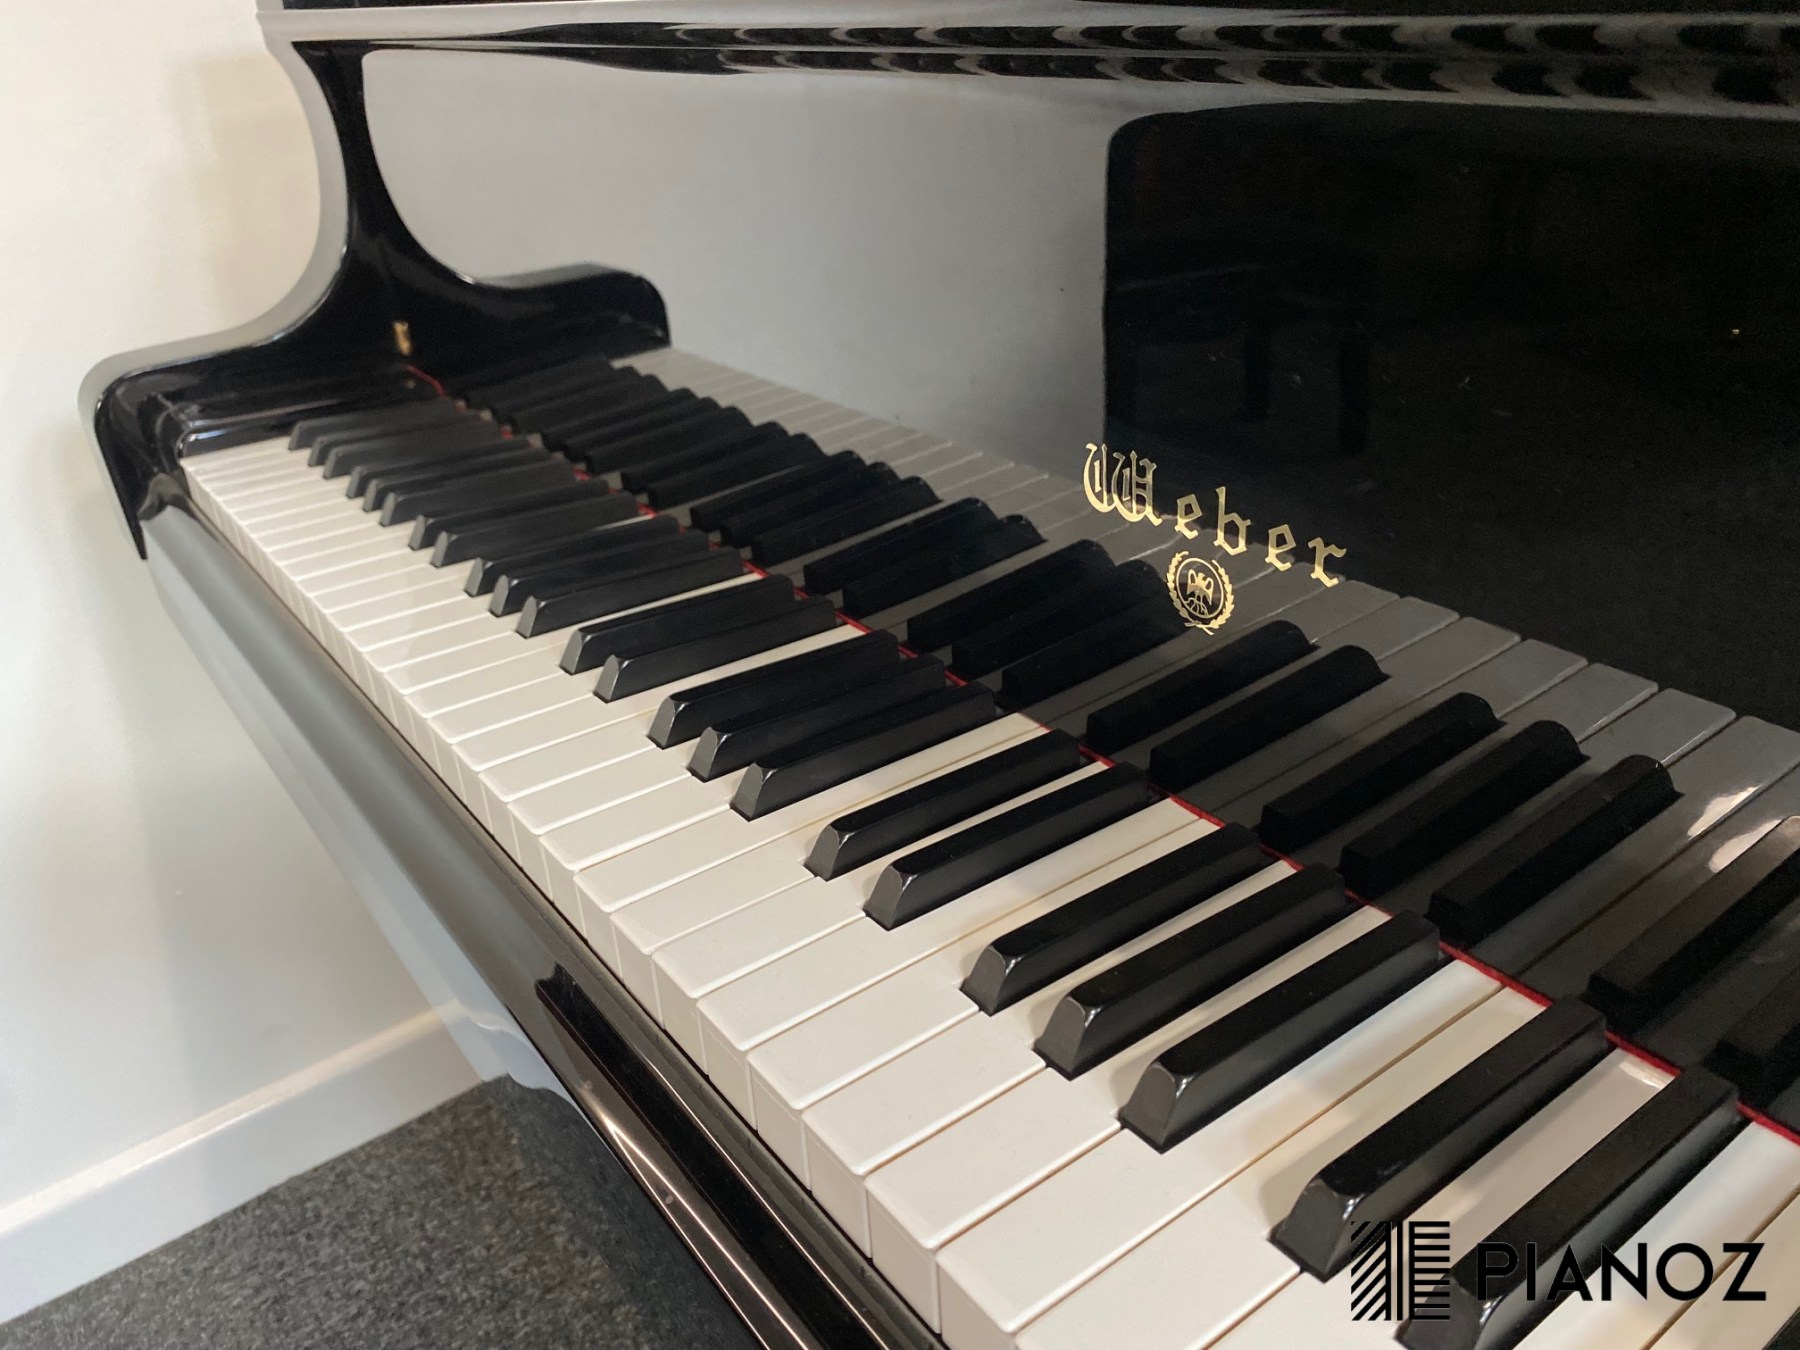 Weber Black High Gloss Baby Grand Piano piano for sale in UK